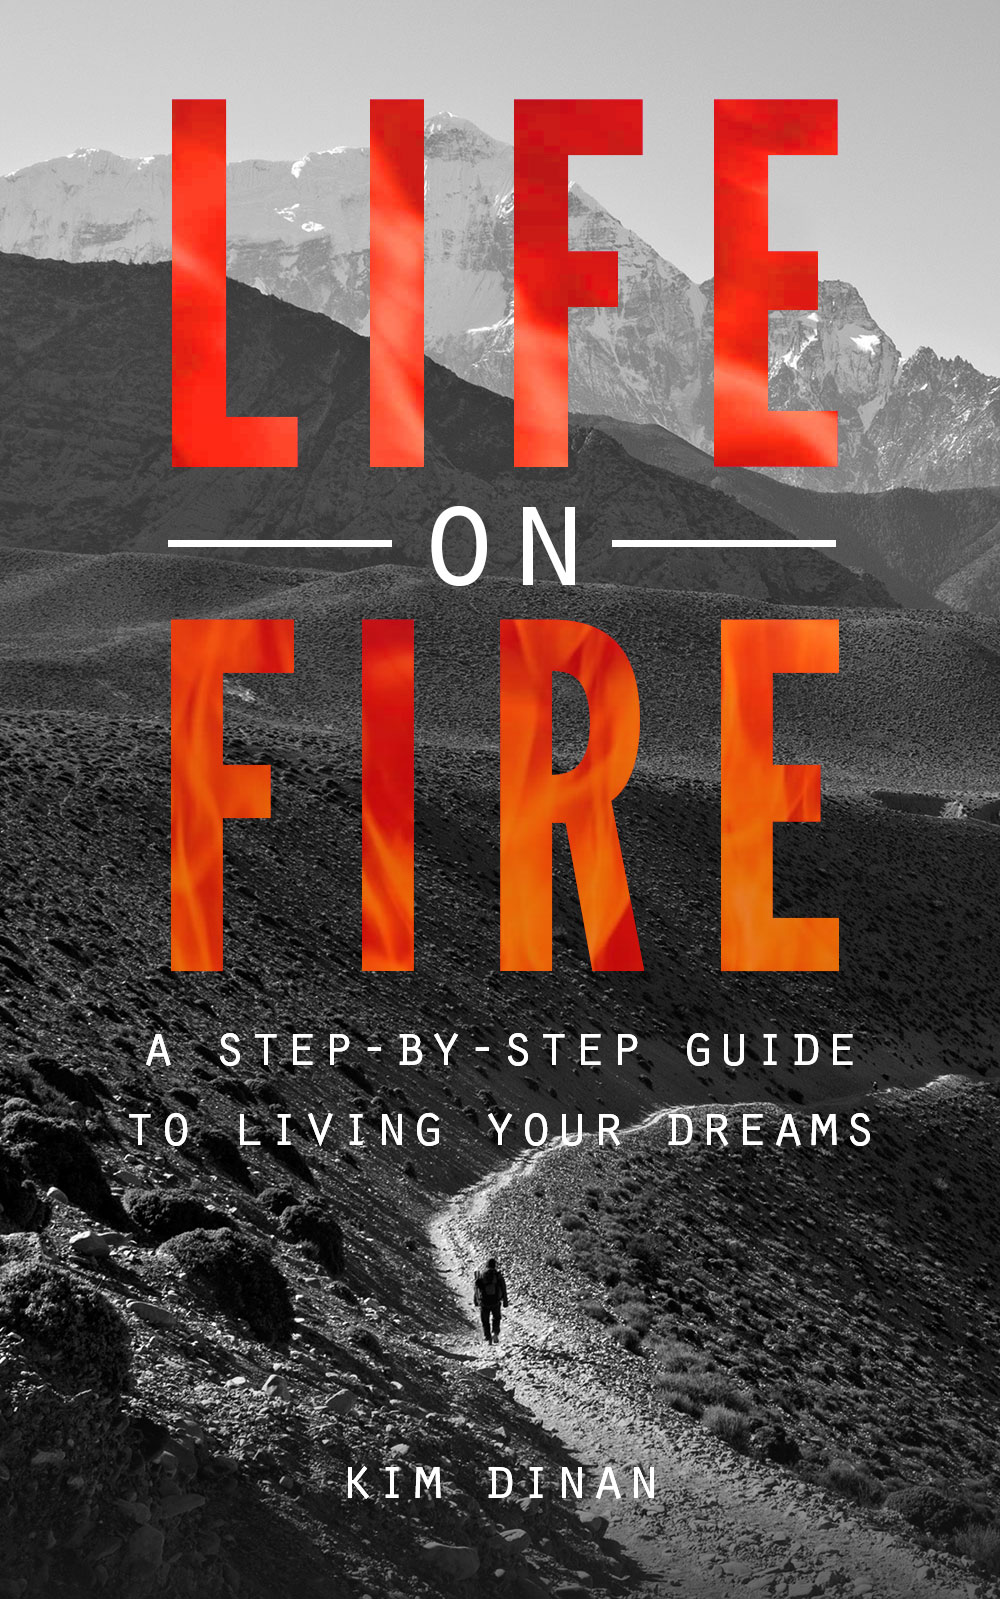 Travel gift ideas - Life on Fire